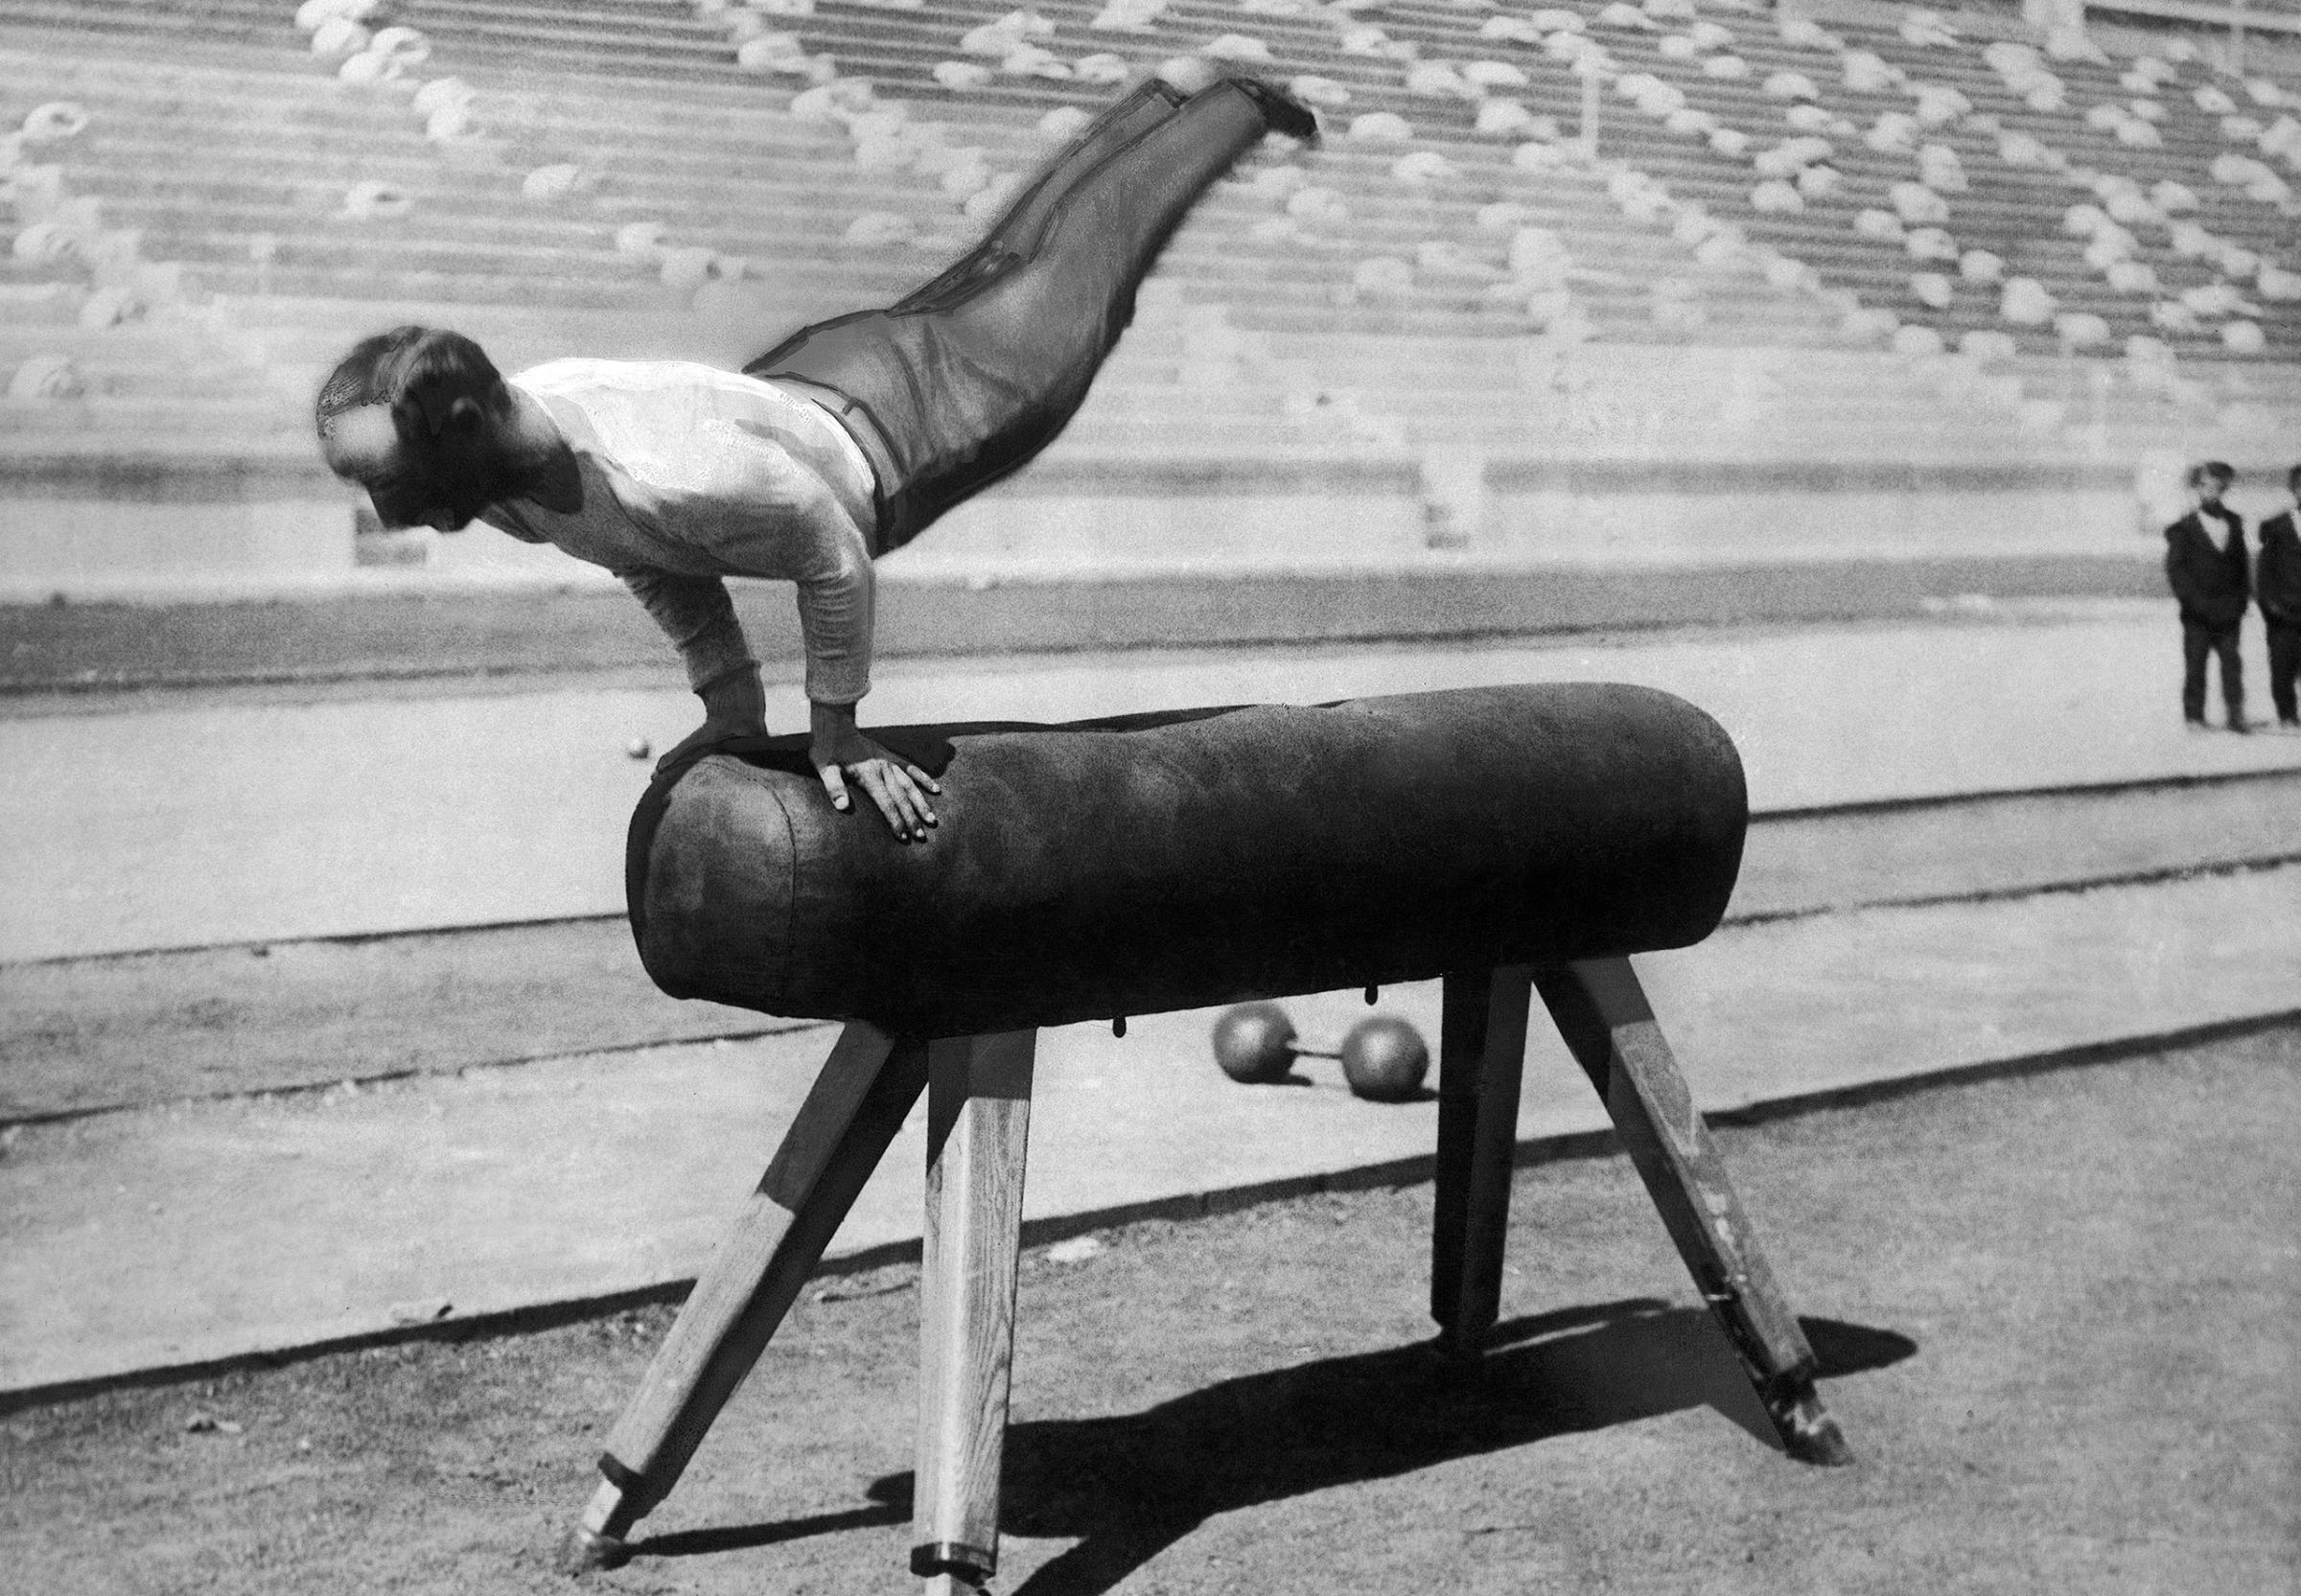 Member of the German gymnastics team Karl Schumann (also Carl Schuhmann), shows his gold medal winning routine at the vaulting horse at the first modern International Summer Olympic Games held at the Panathinaiko Stadium on April 9, 1896 in Athens, Greece.